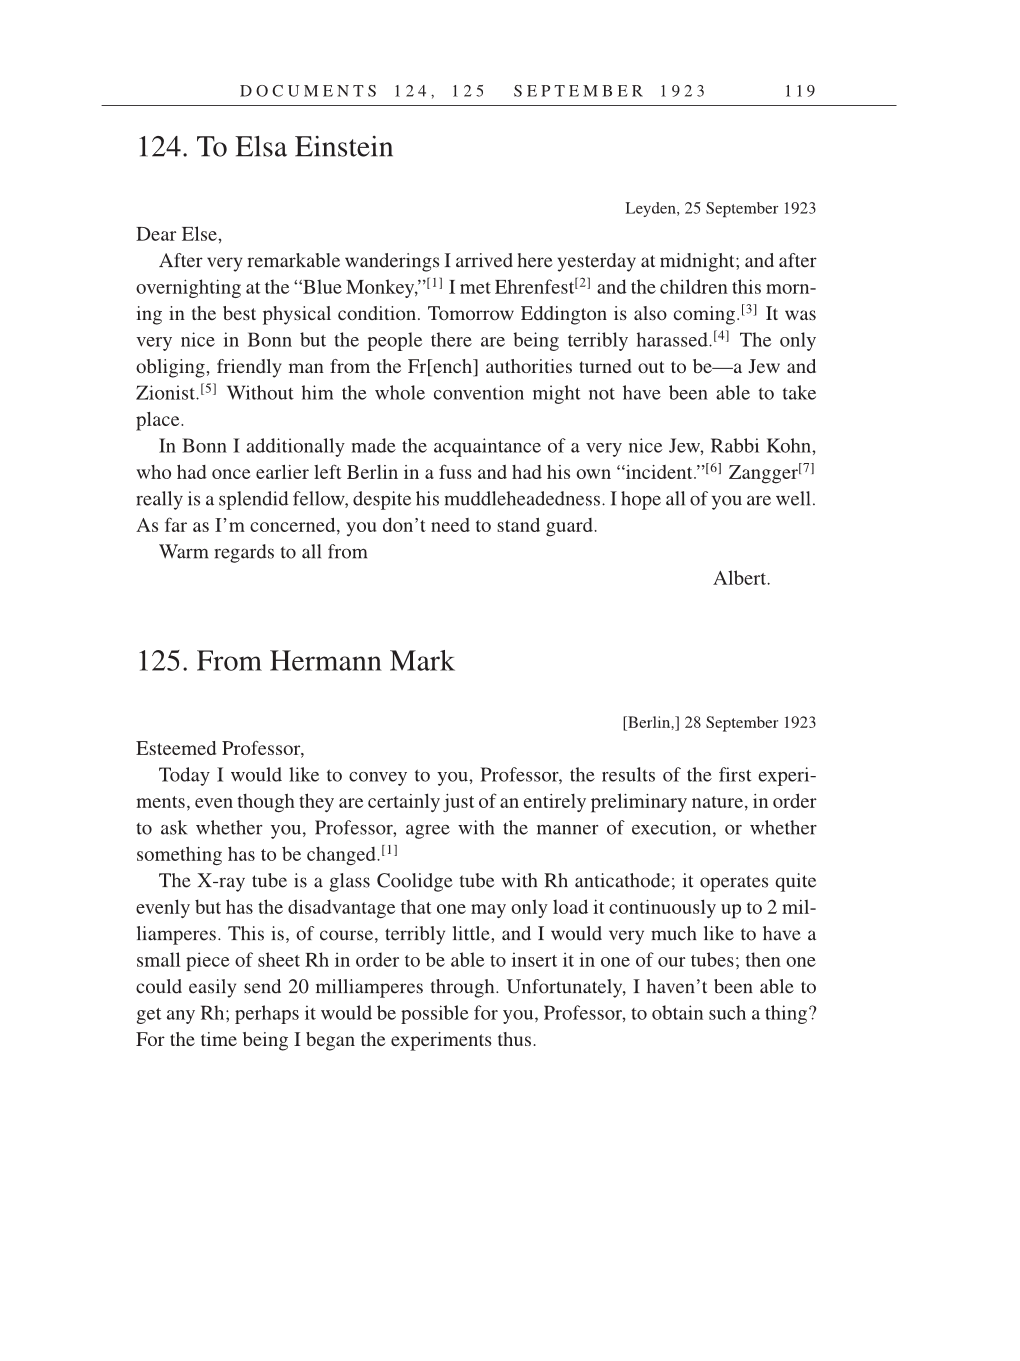 Volume 14: The Berlin Years: Writings & Correspondence, April 1923-May 1925 (English Translation Supplement) page 119